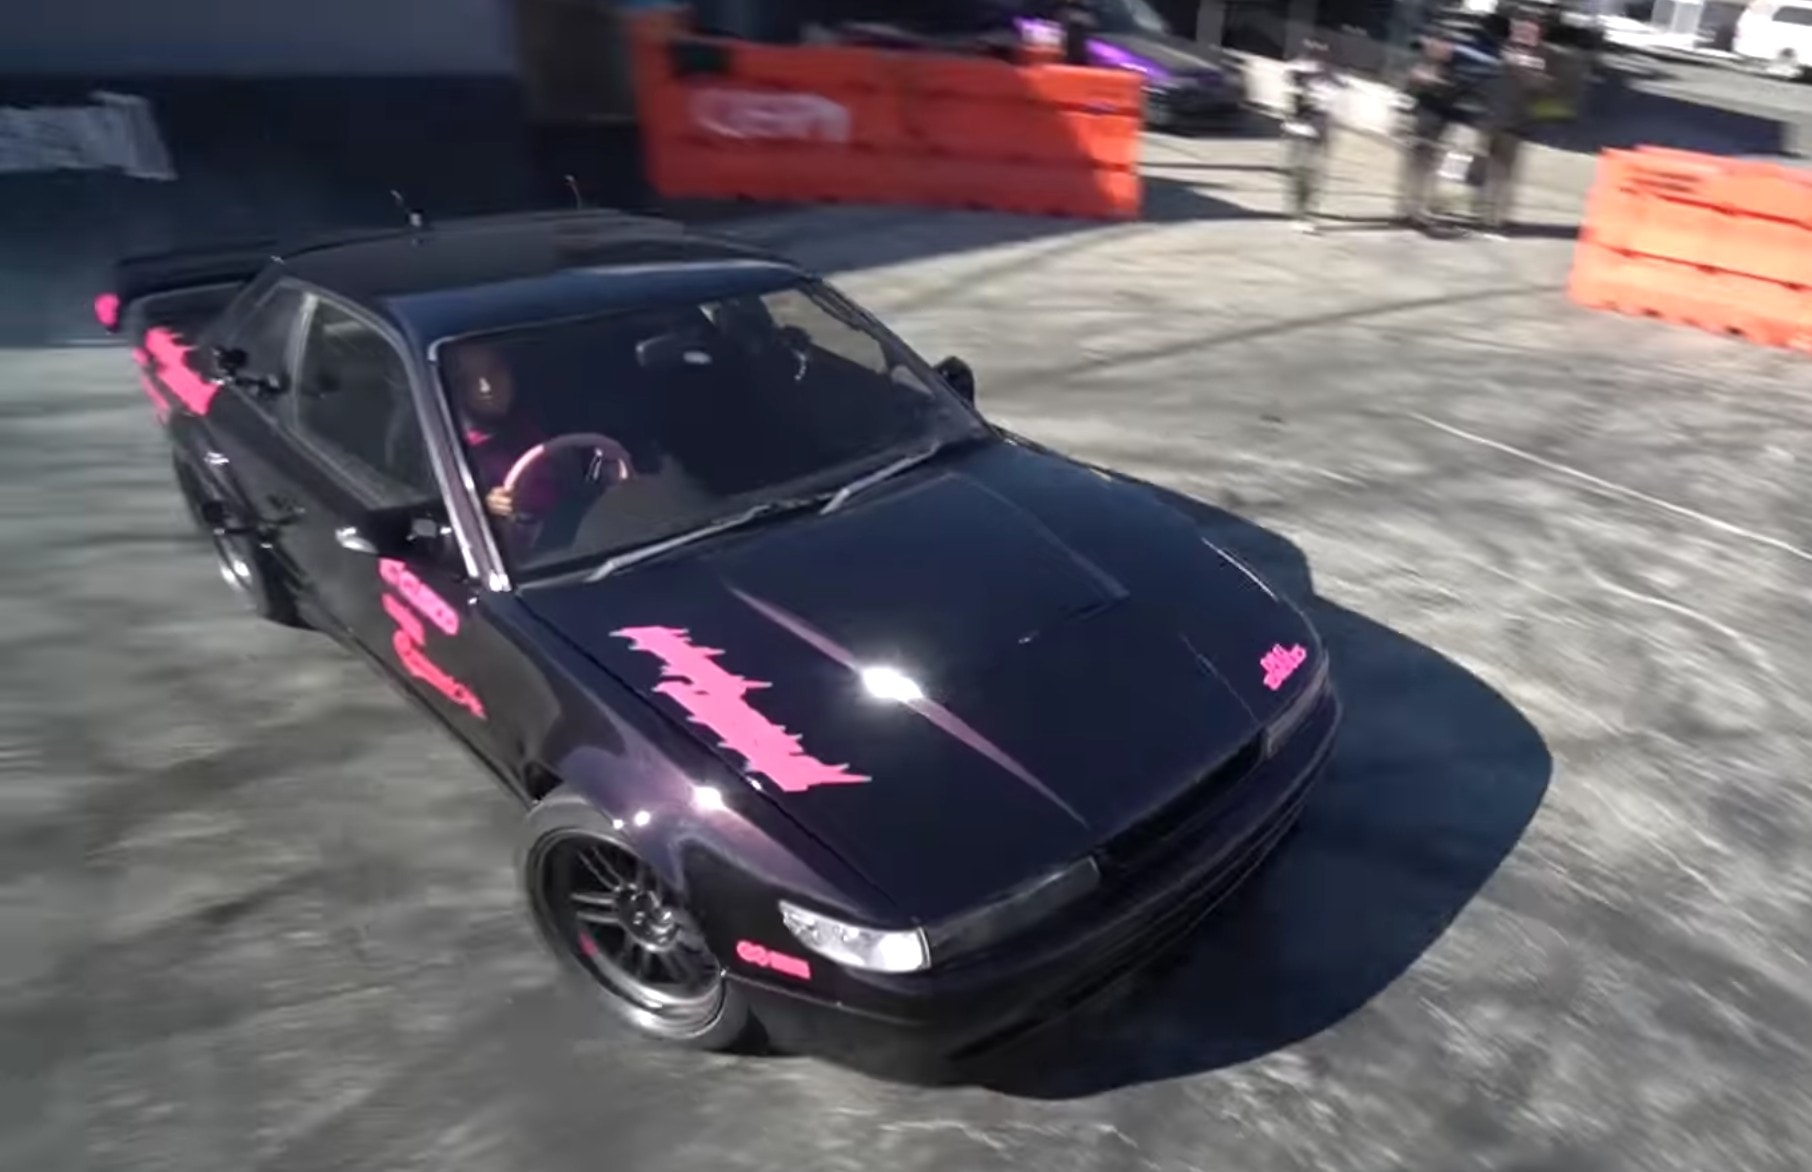 Gran Turismo 7 September Update Adds Nissan Silvia, Two Other Cars